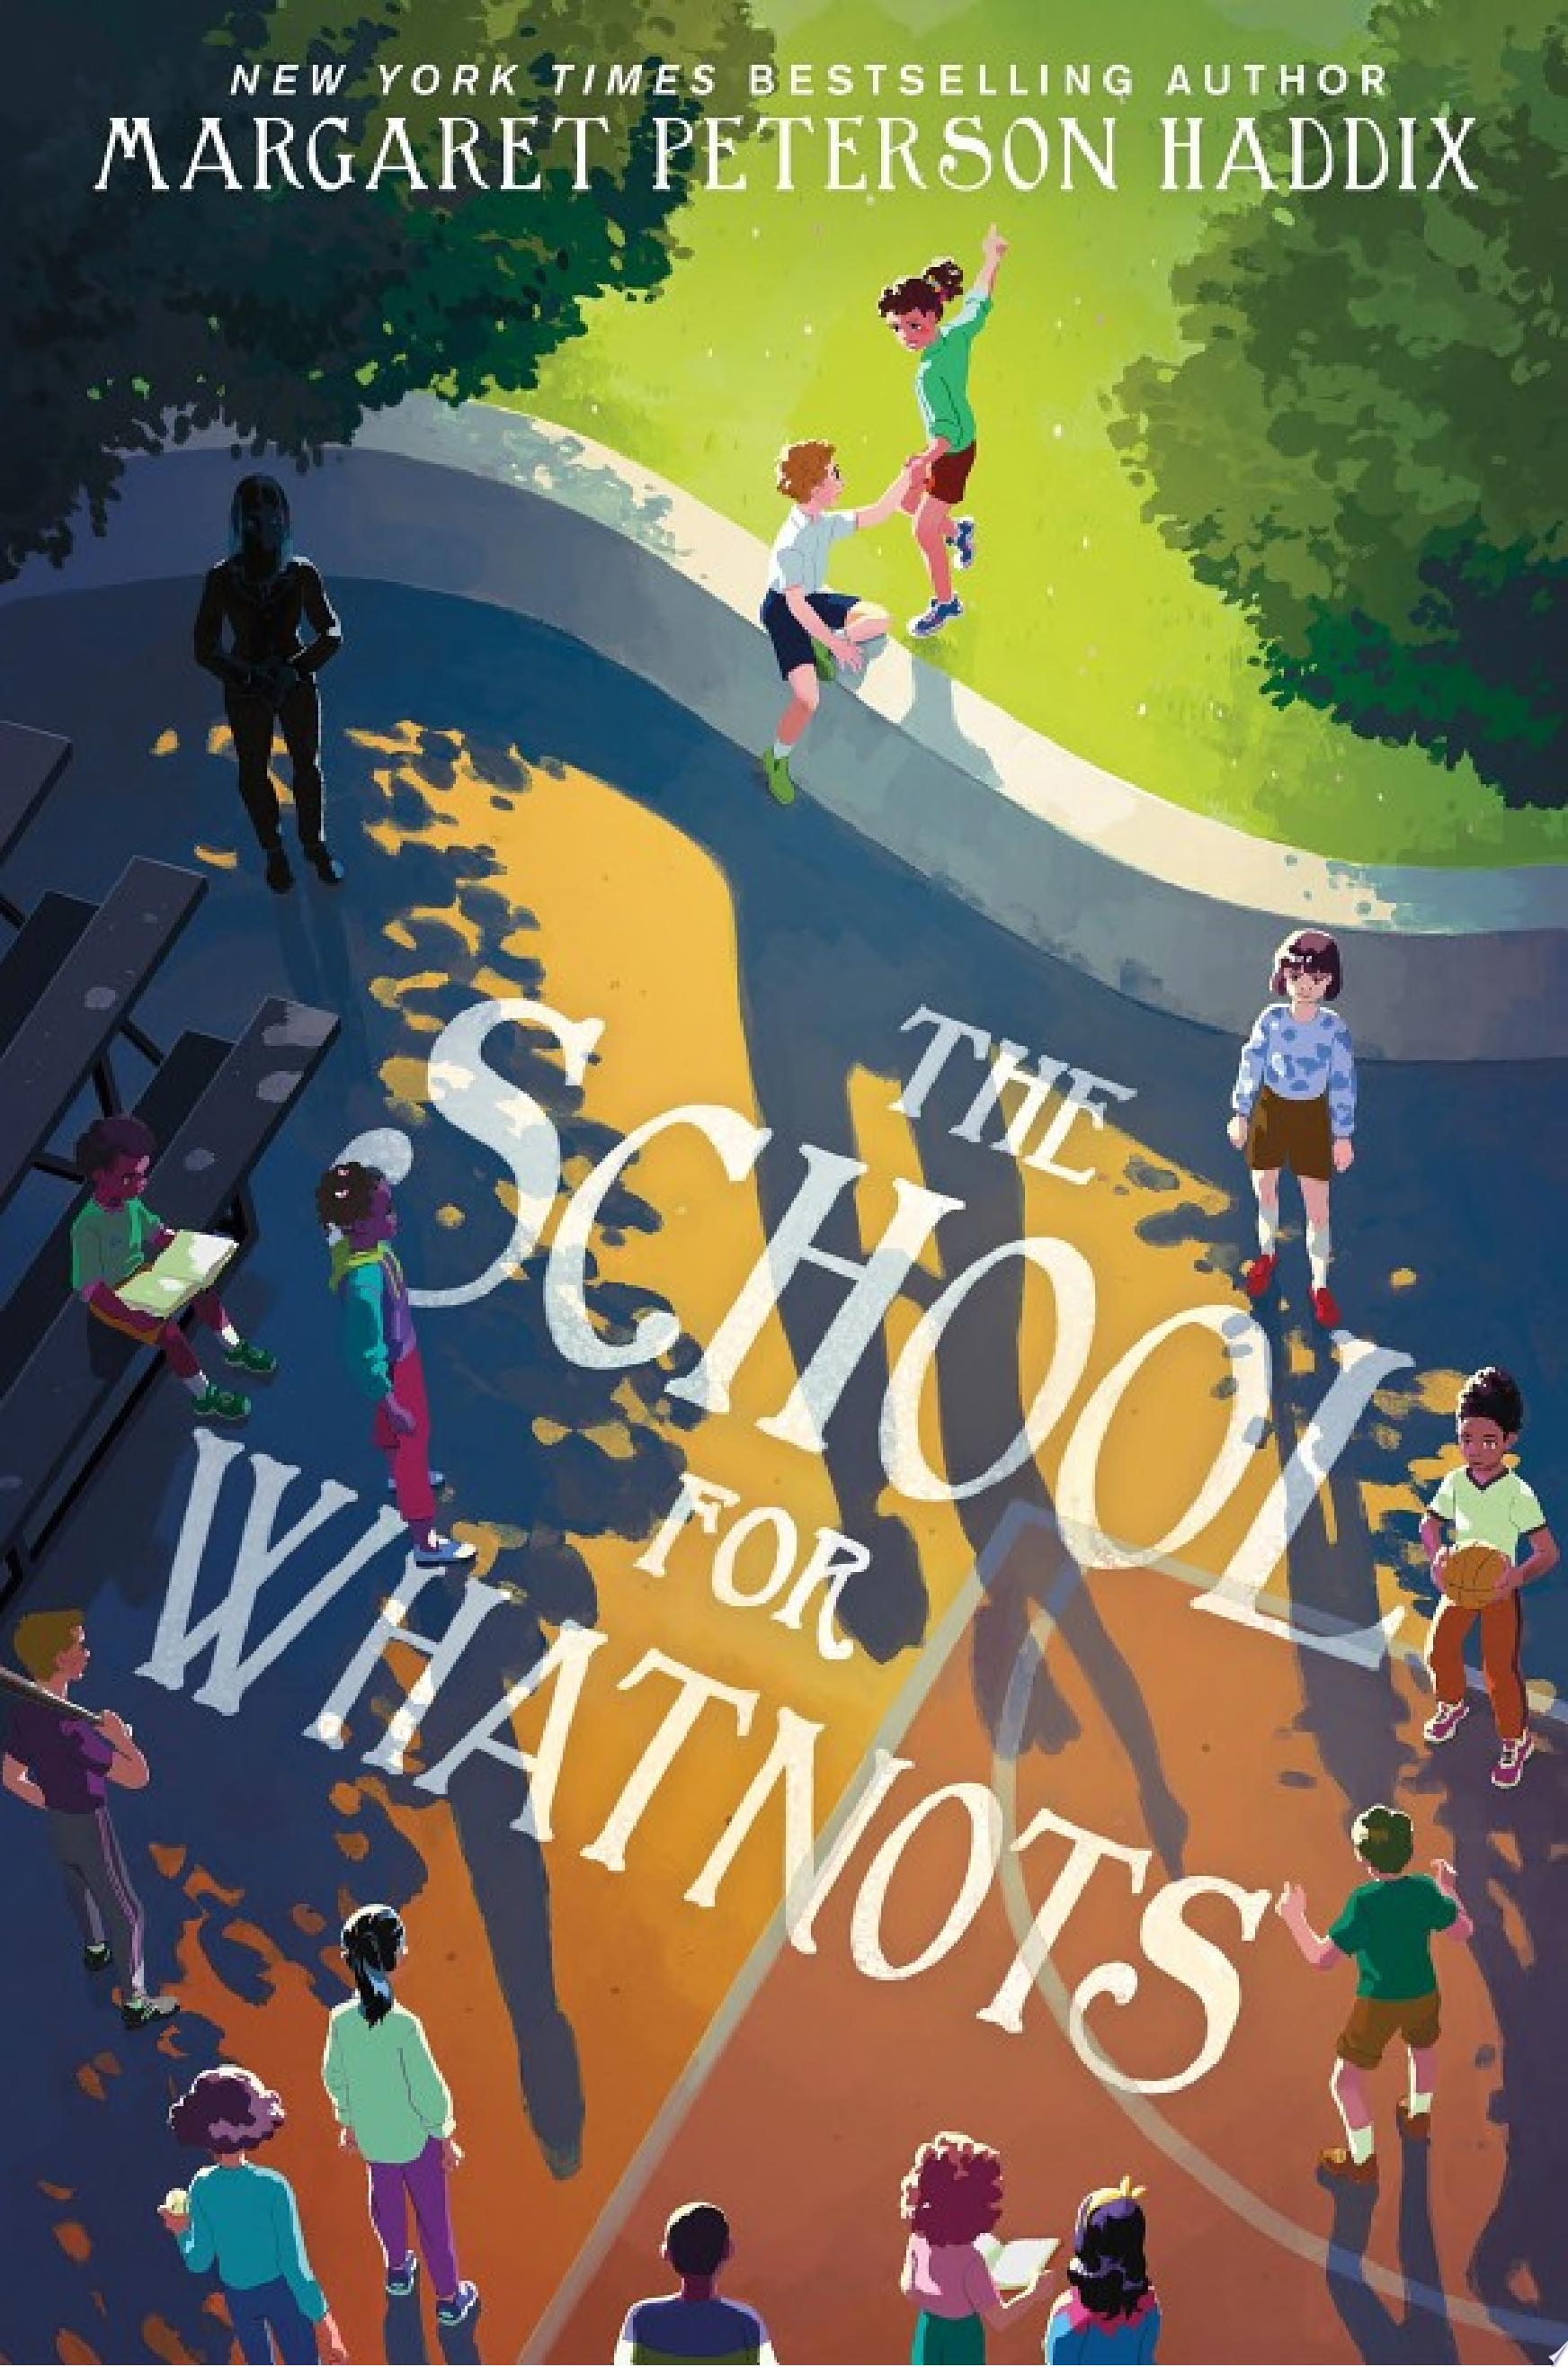 Image for "The School for Whatnots"